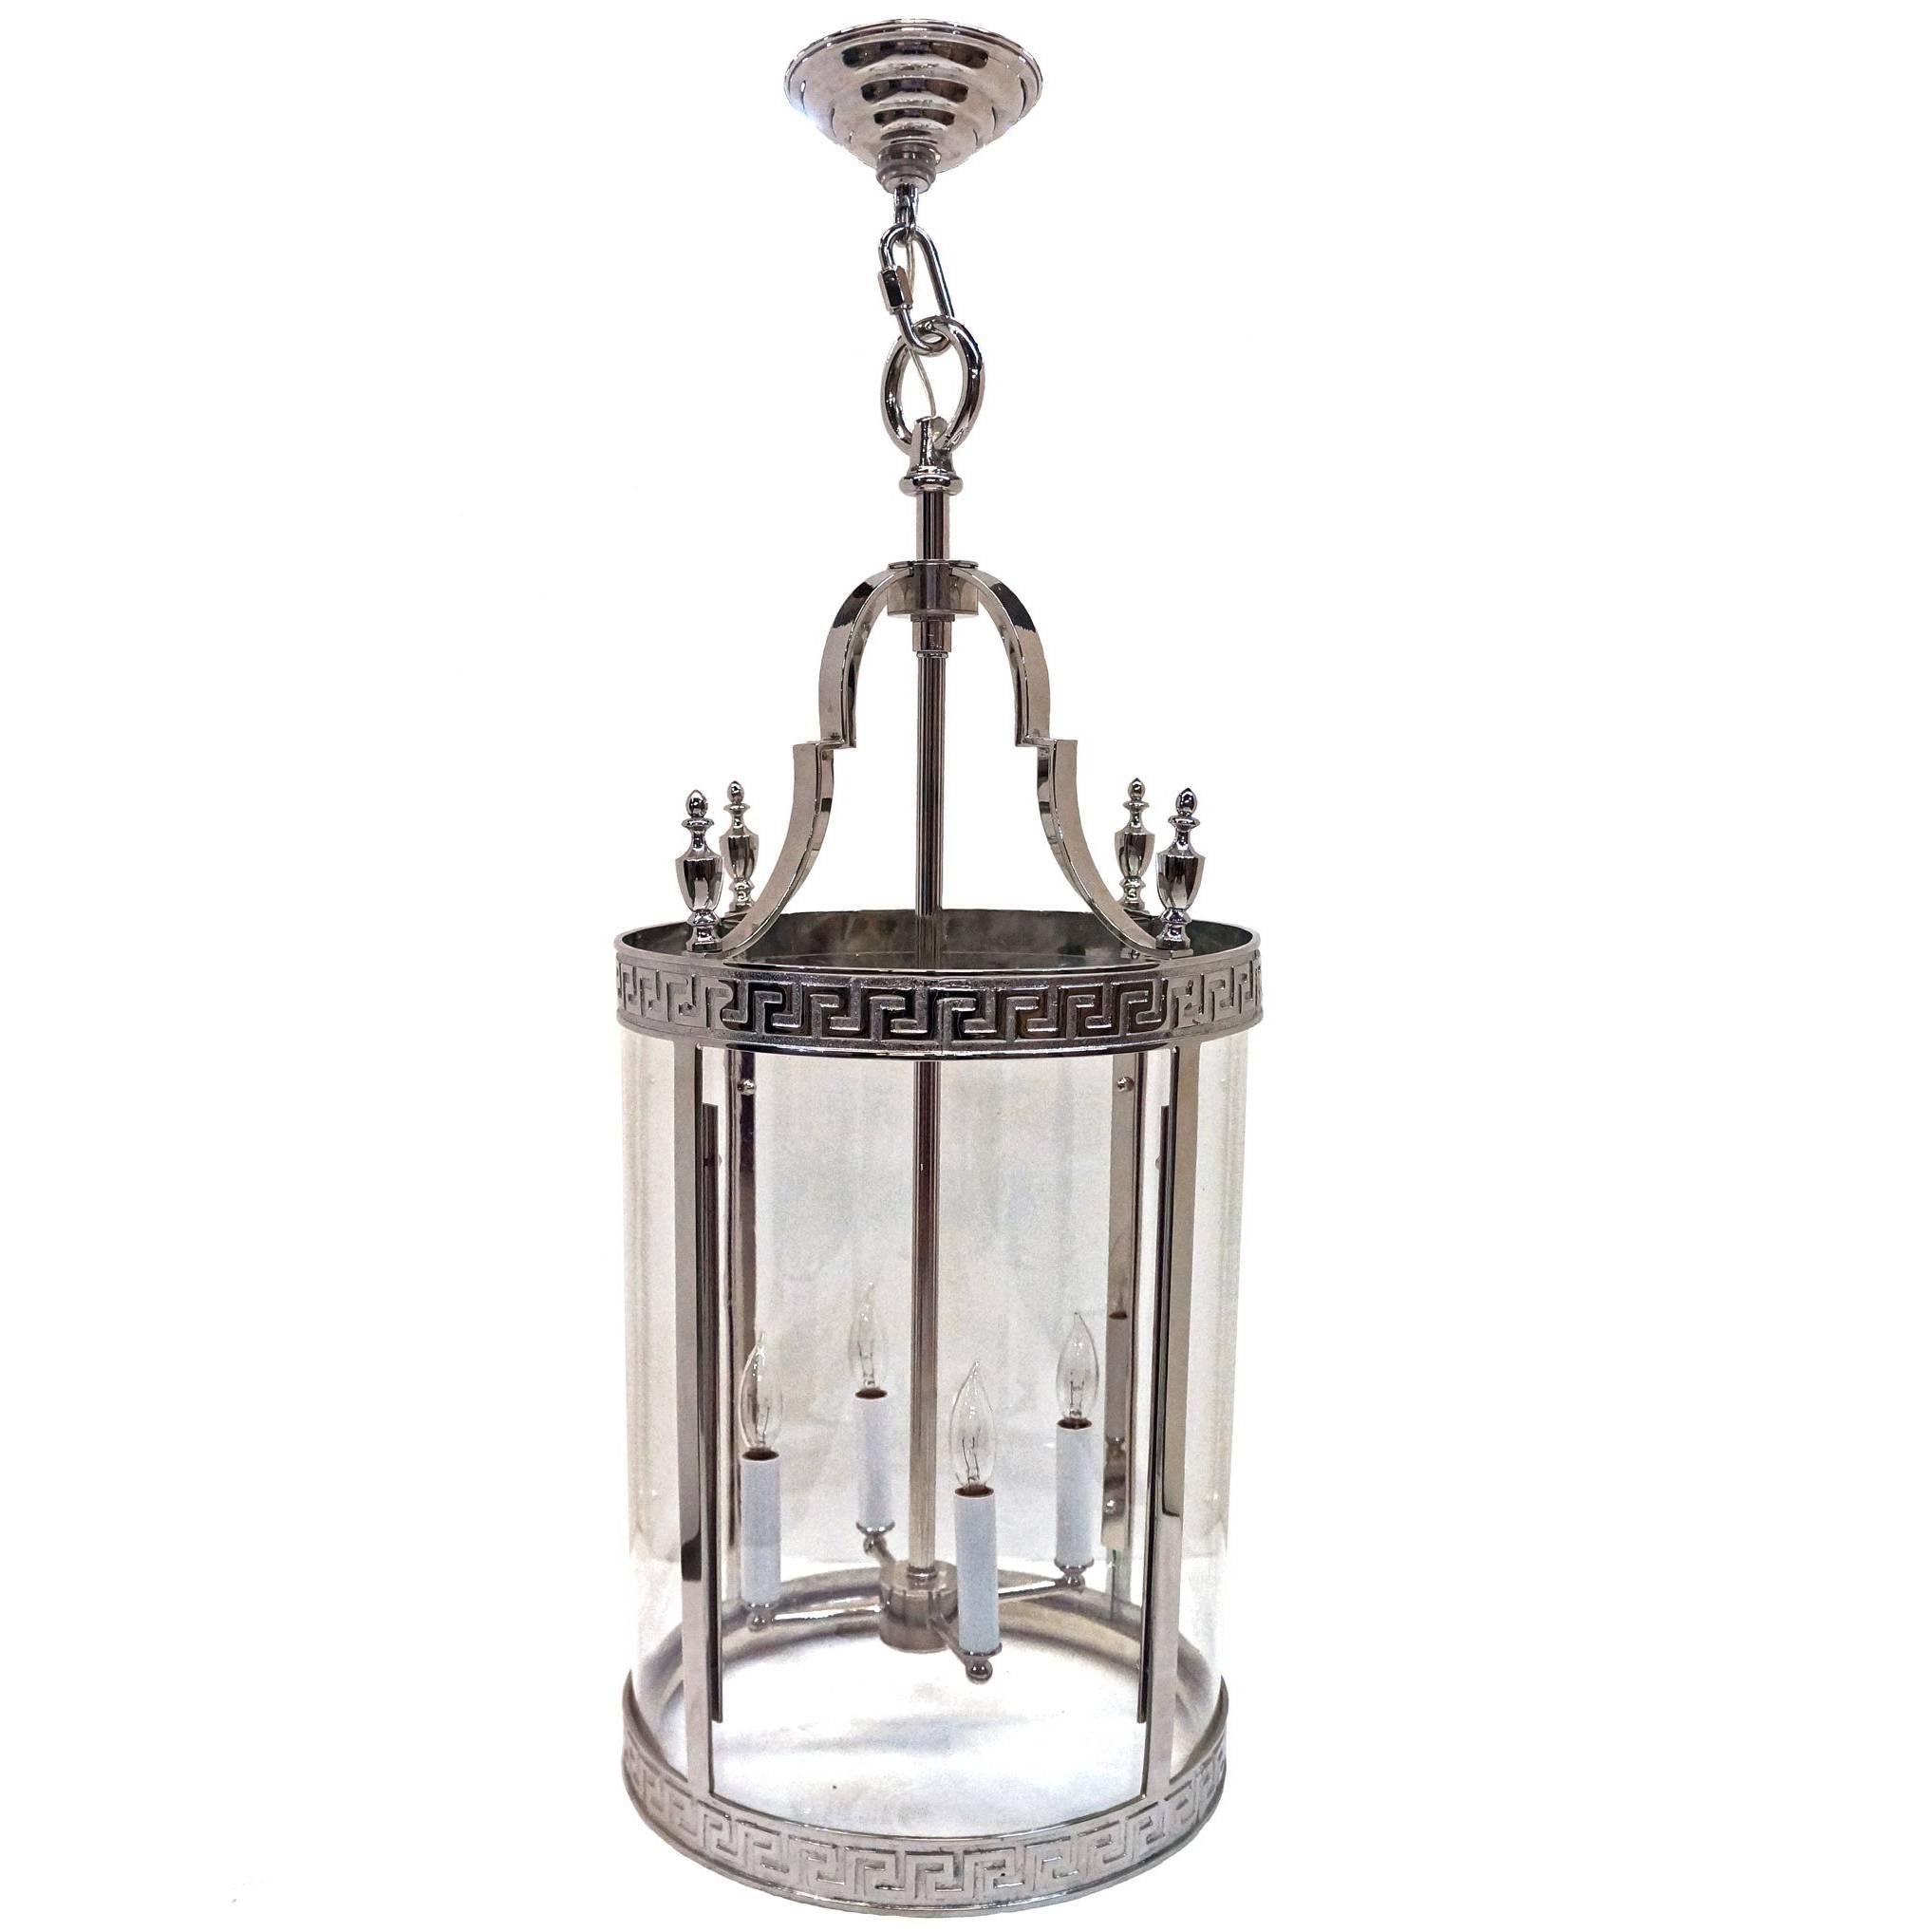 20th Century Neoclassical Cylindrical Hall Lantern For Sale